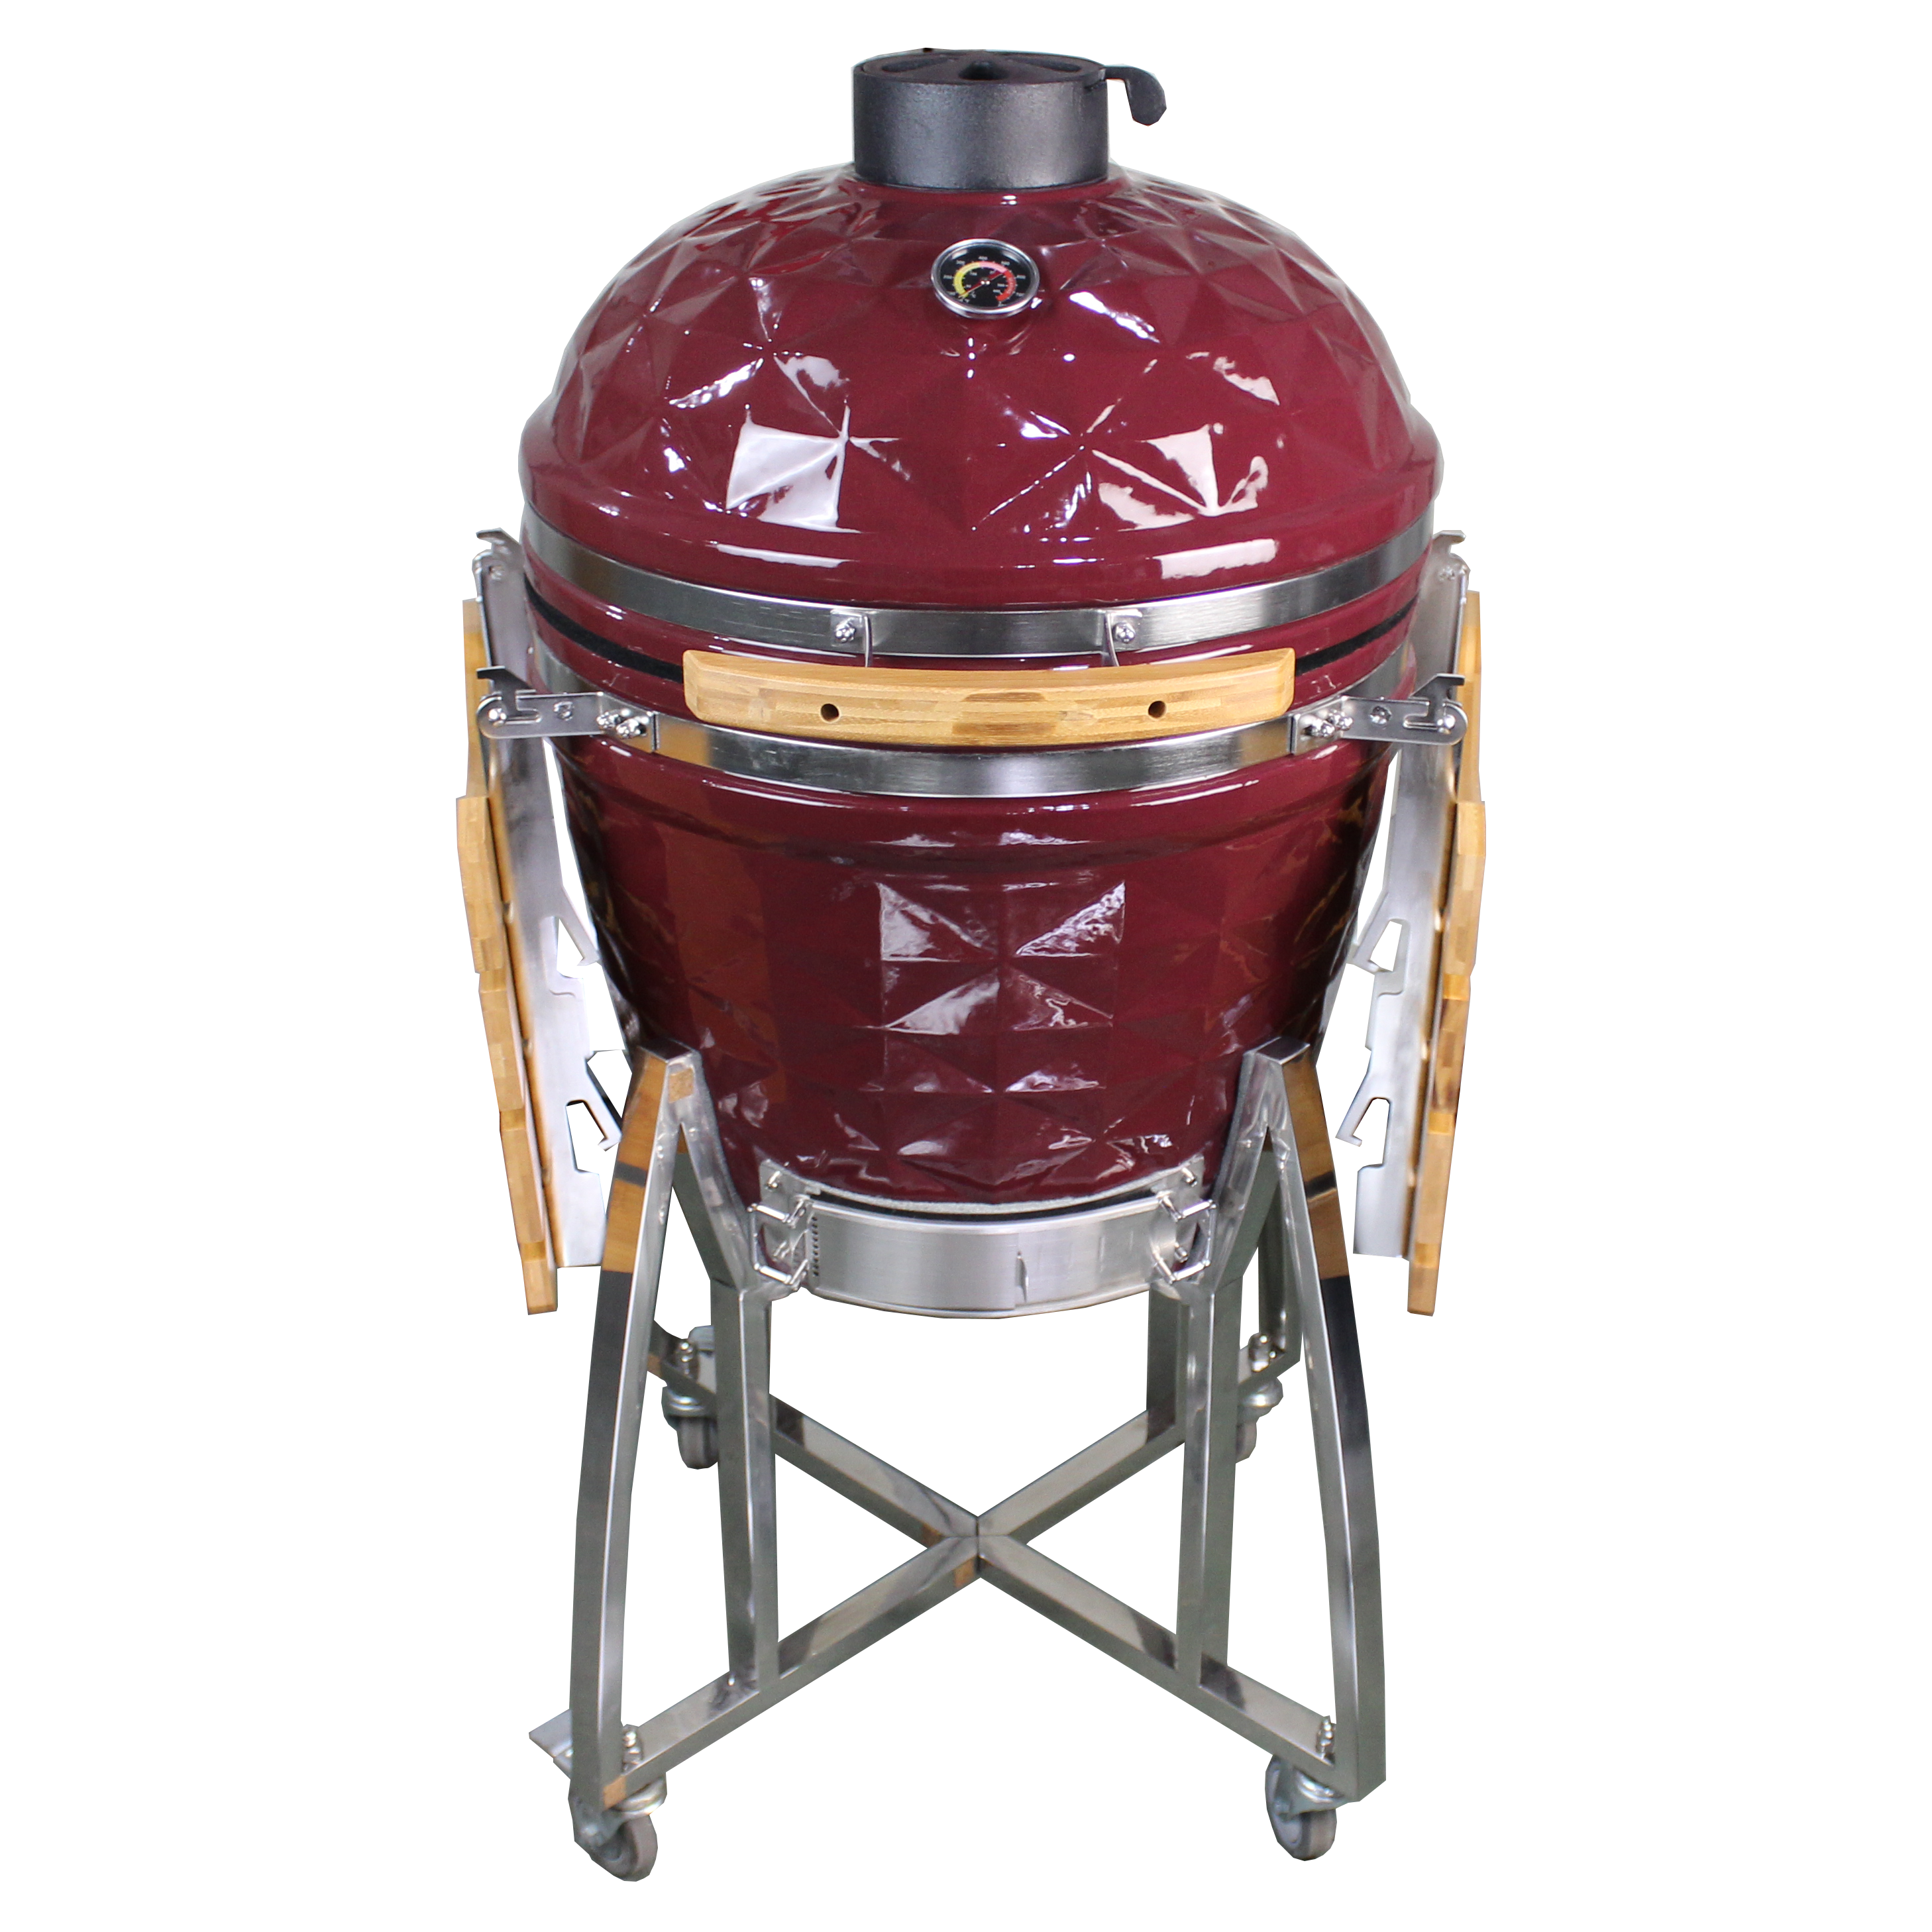 Auplex 22″ Outdoor Clay Oven Cooker Charcoal  BBQ Grill Featured Image